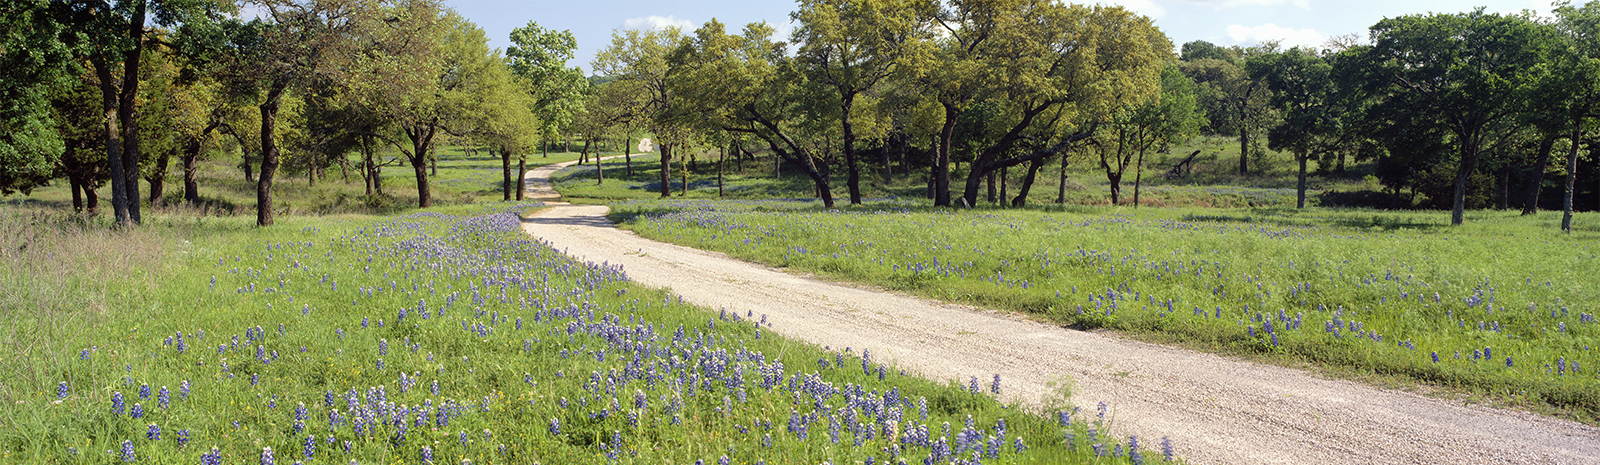 Portrait Shot Of Farm Road In Texas Hill Country